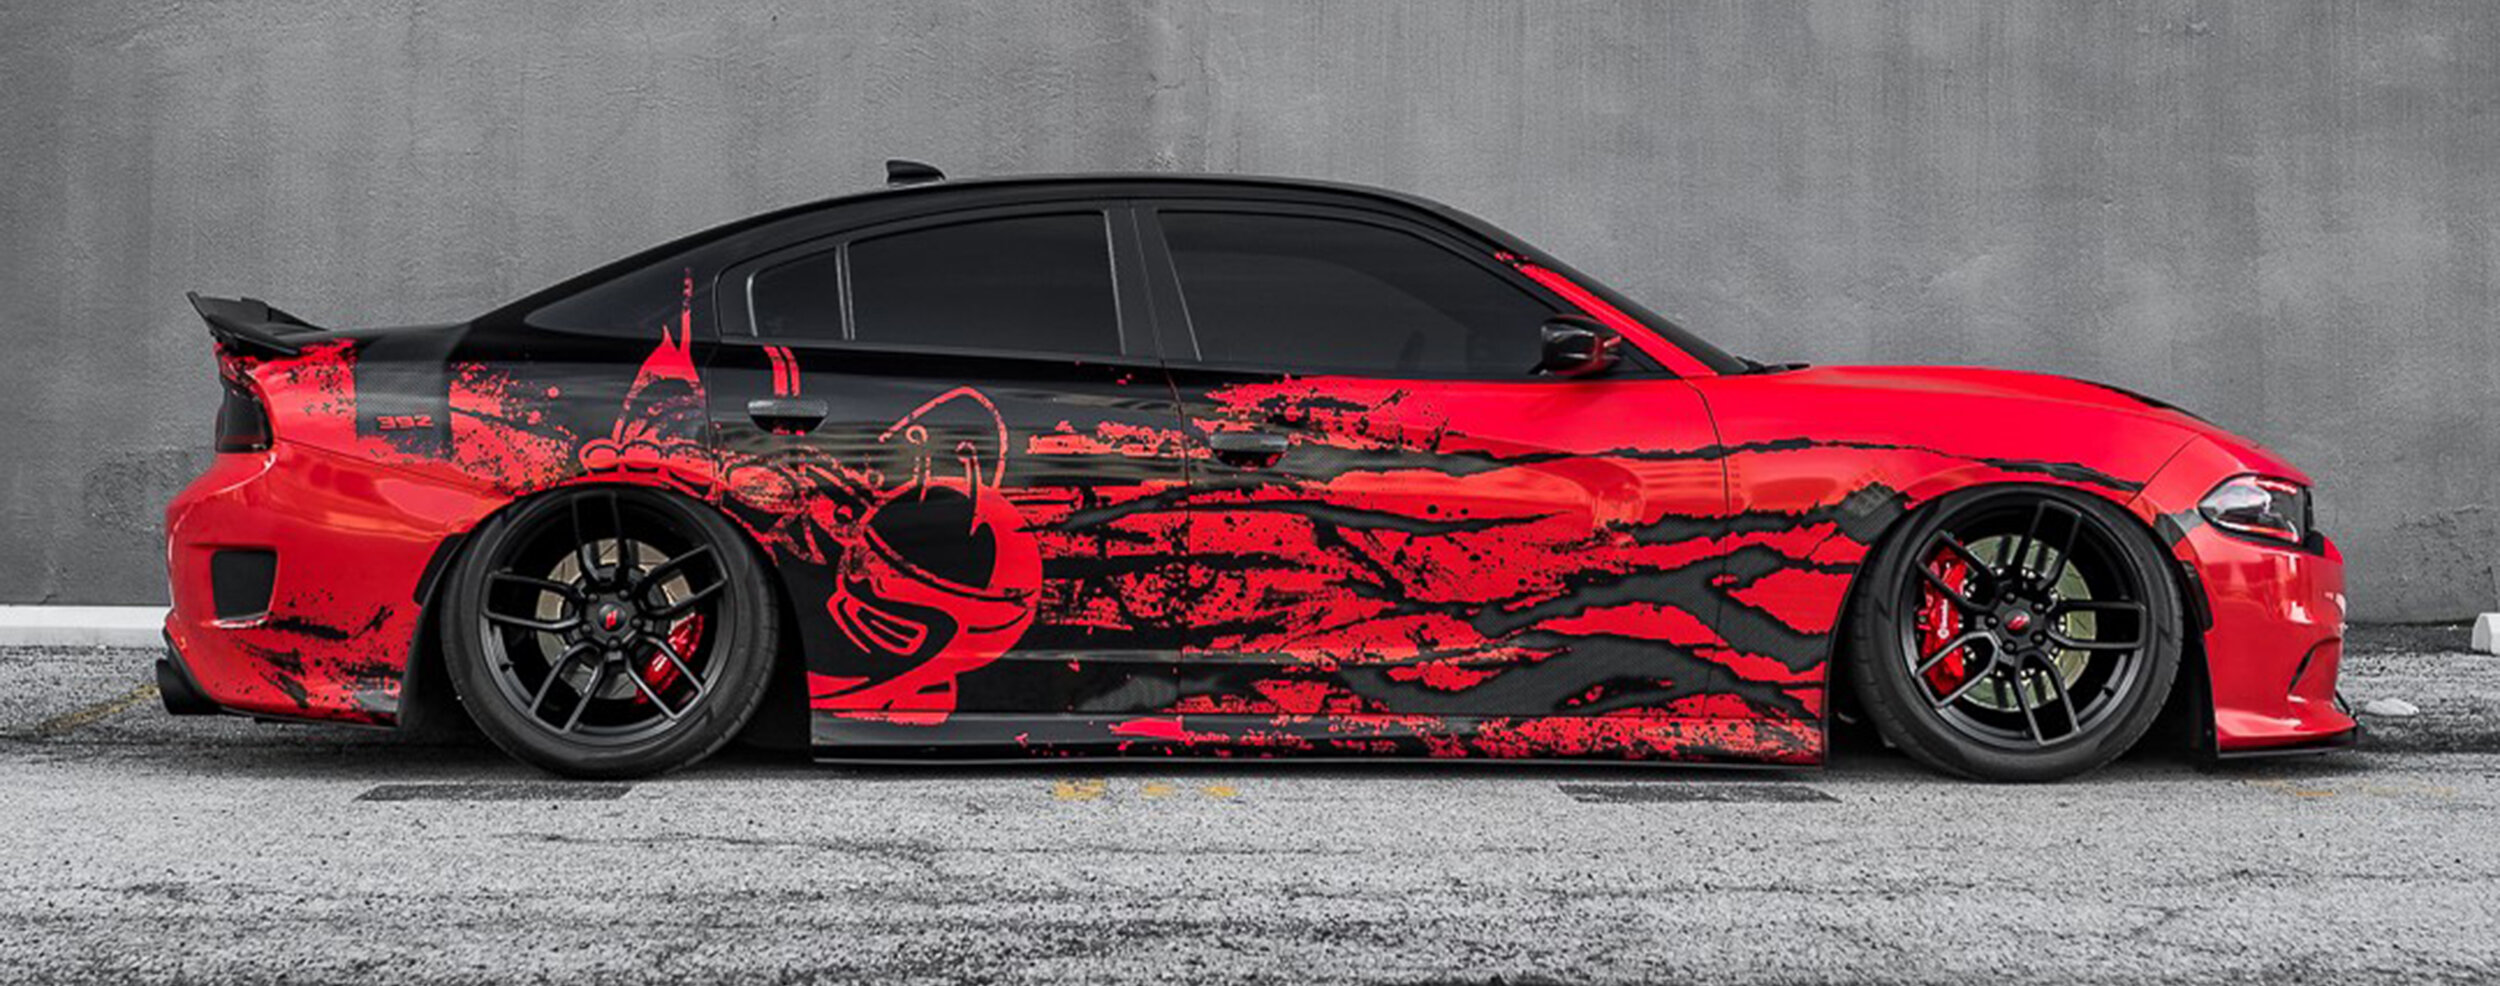 SplatterPack Wrap - Digitally Printed Wrap for Dodge Charge Scat Pack —  Incognito Wraps